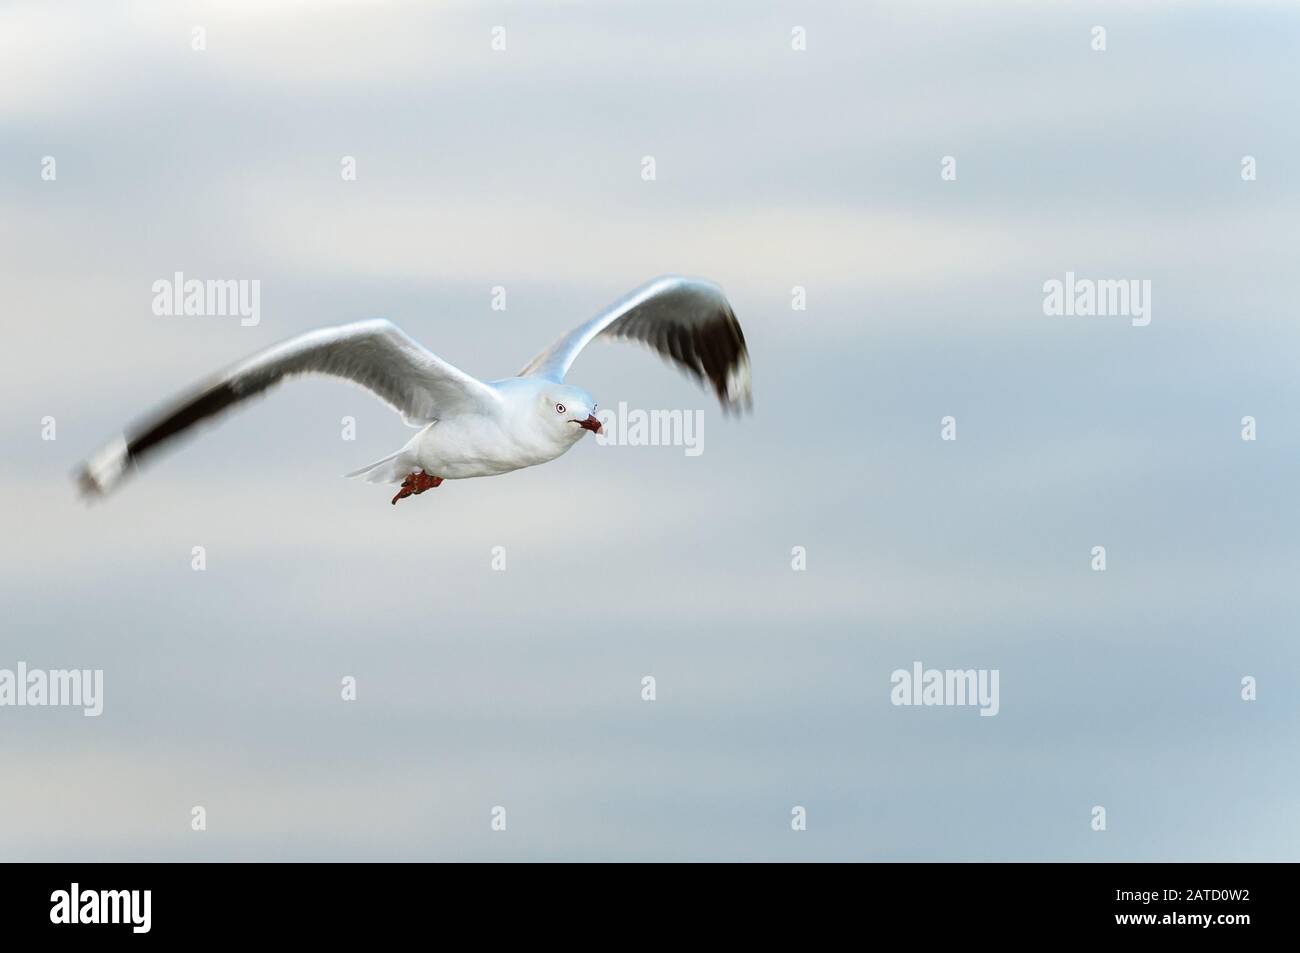 Flying Silver gull in an open, daytime cloudy sky in Cairns, Queensland. Stock Photo